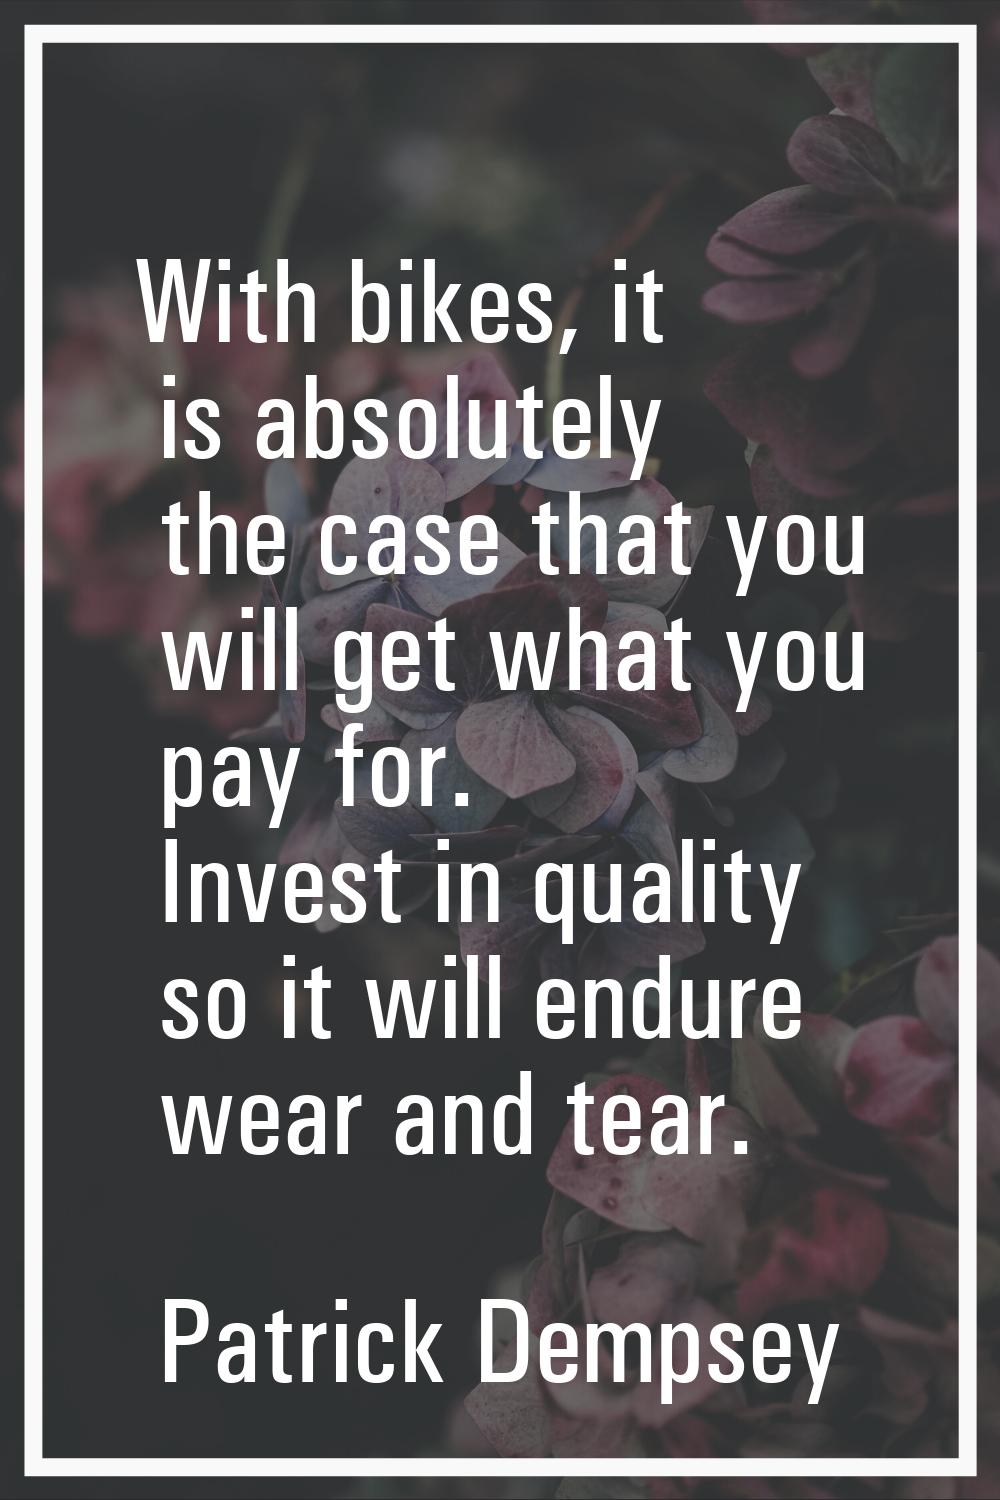 With bikes, it is absolutely the case that you will get what you pay for. Invest in quality so it w